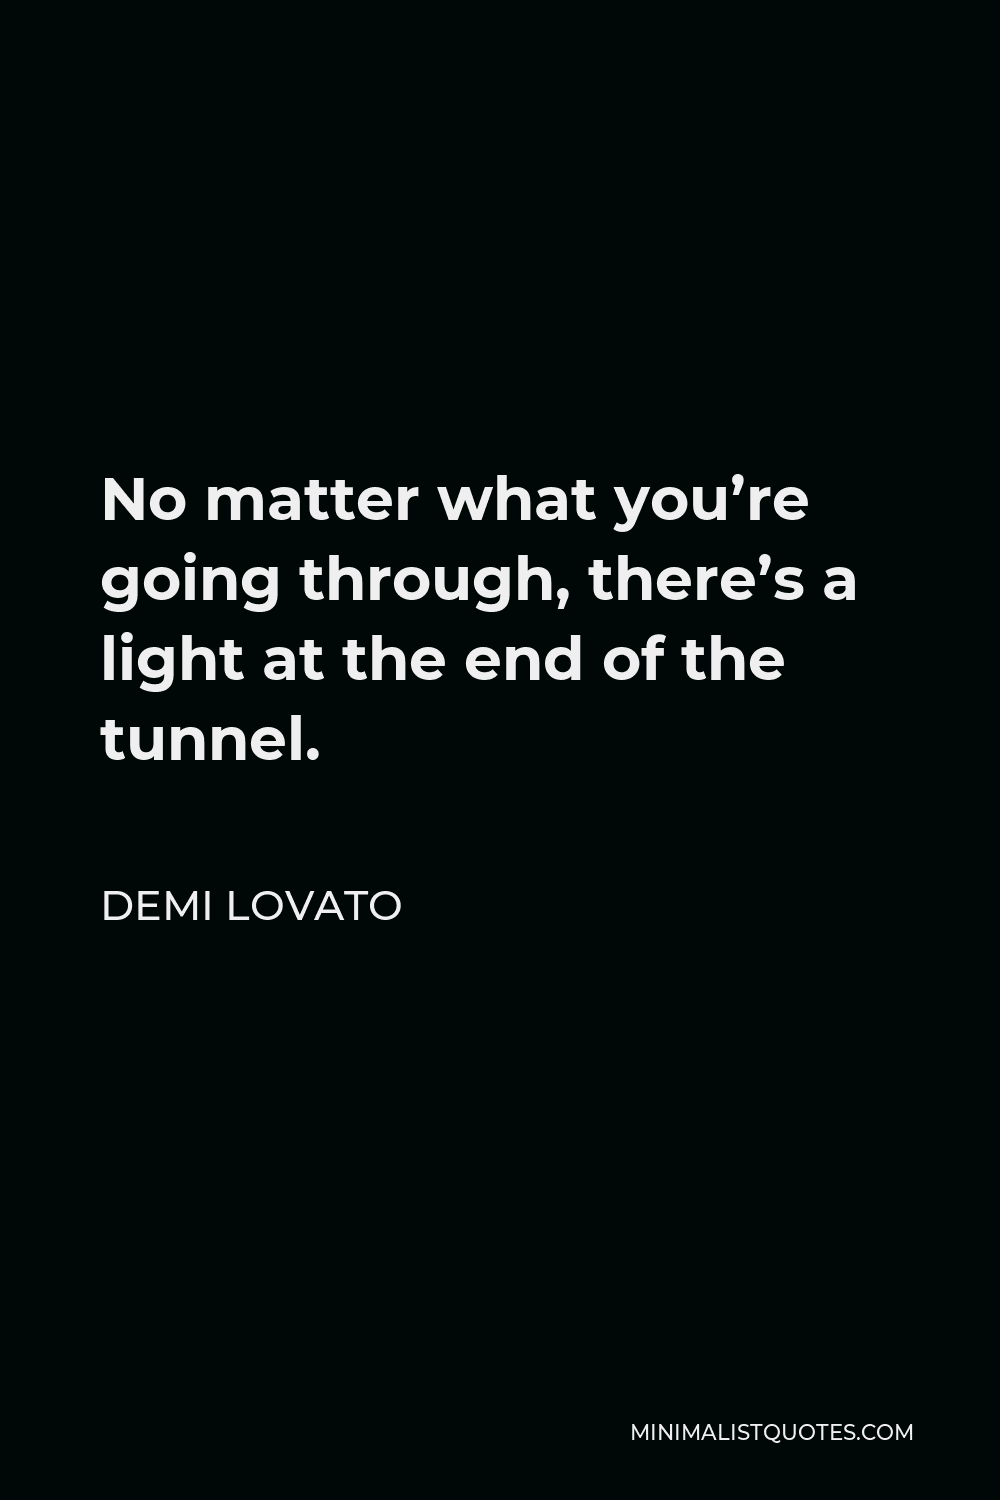 Demi Lovato Quote - No matter what you’re going through, there’s a light at the end of the tunnel and it may seem hard to get to it but you can do it and just keep working towards it and you’ll find the positive side of things.